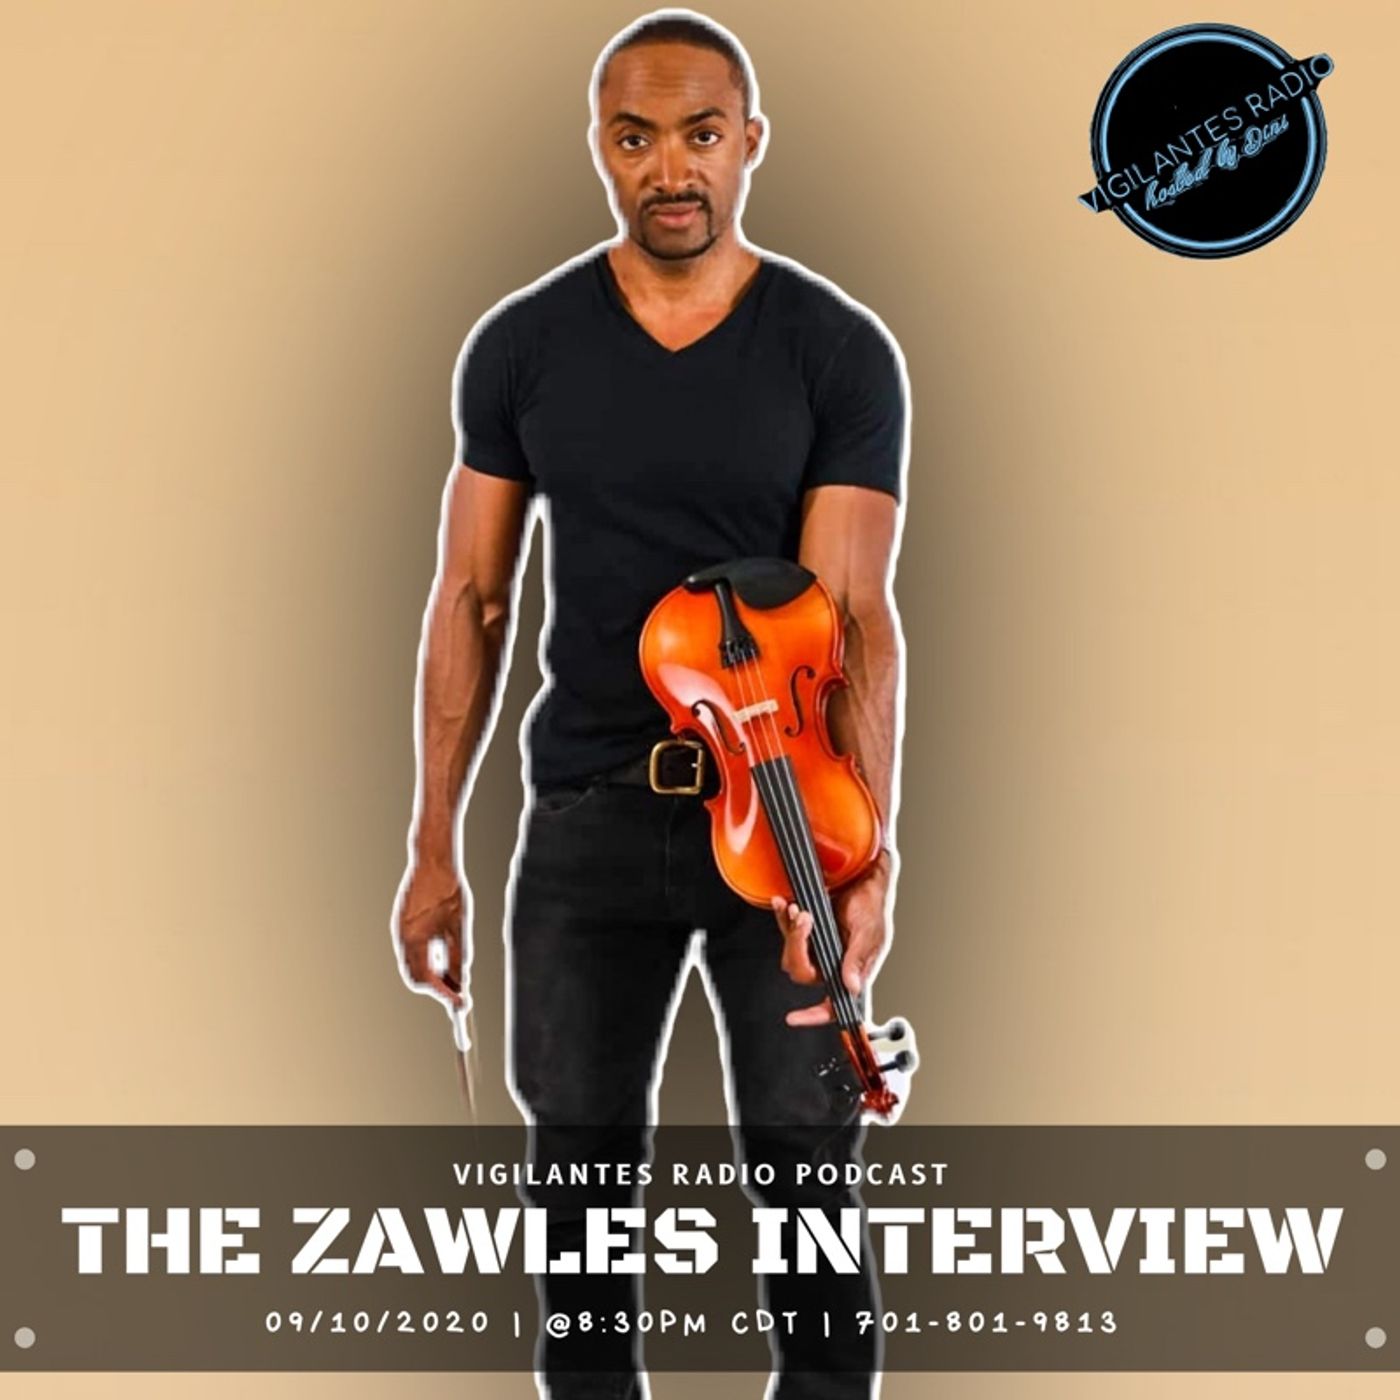 The Zawles Interview. Image